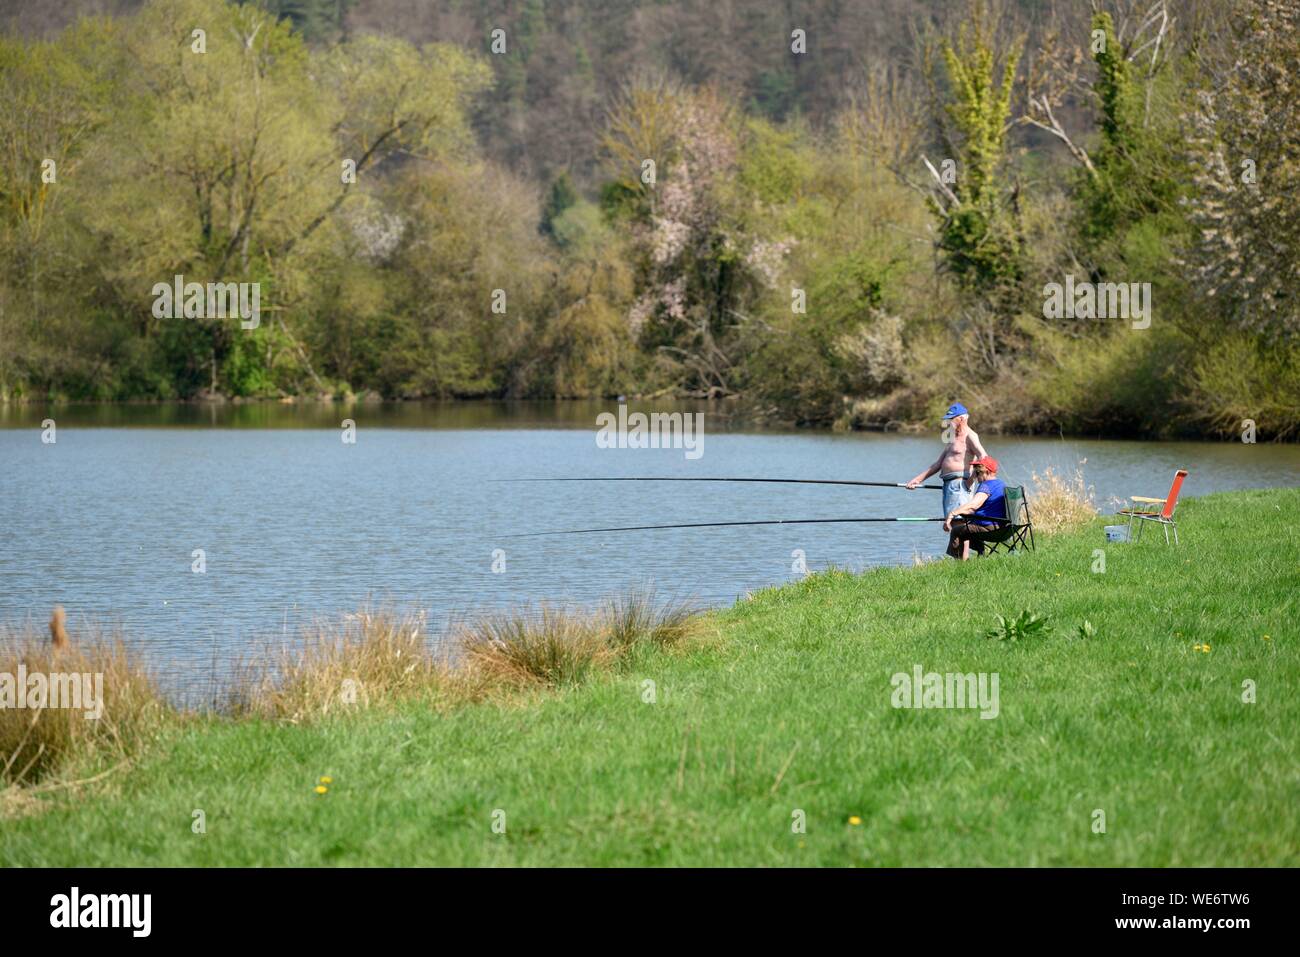 France, Meurthe and Moselle, Villey Saint Etienne, Terrouin Valley jumping into the Moselle, fishermen couple Stock Photo